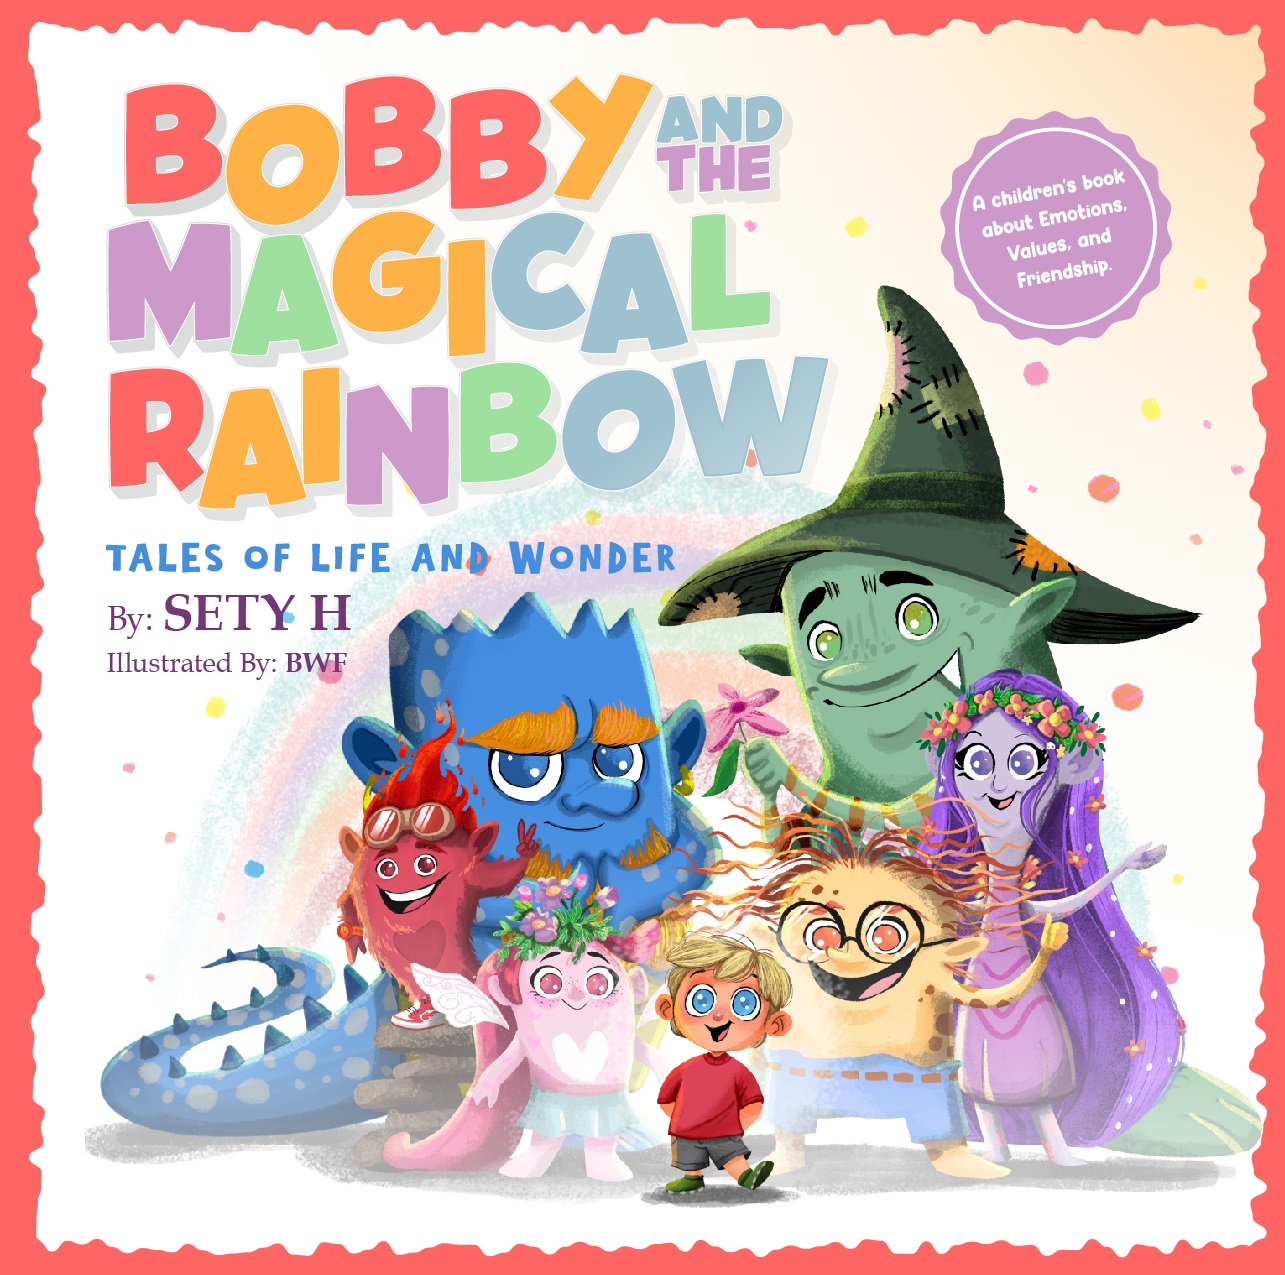 Sety H. Takes Readers on an Enchanting Journey in Her Book Bobby and the Magical Rainbow